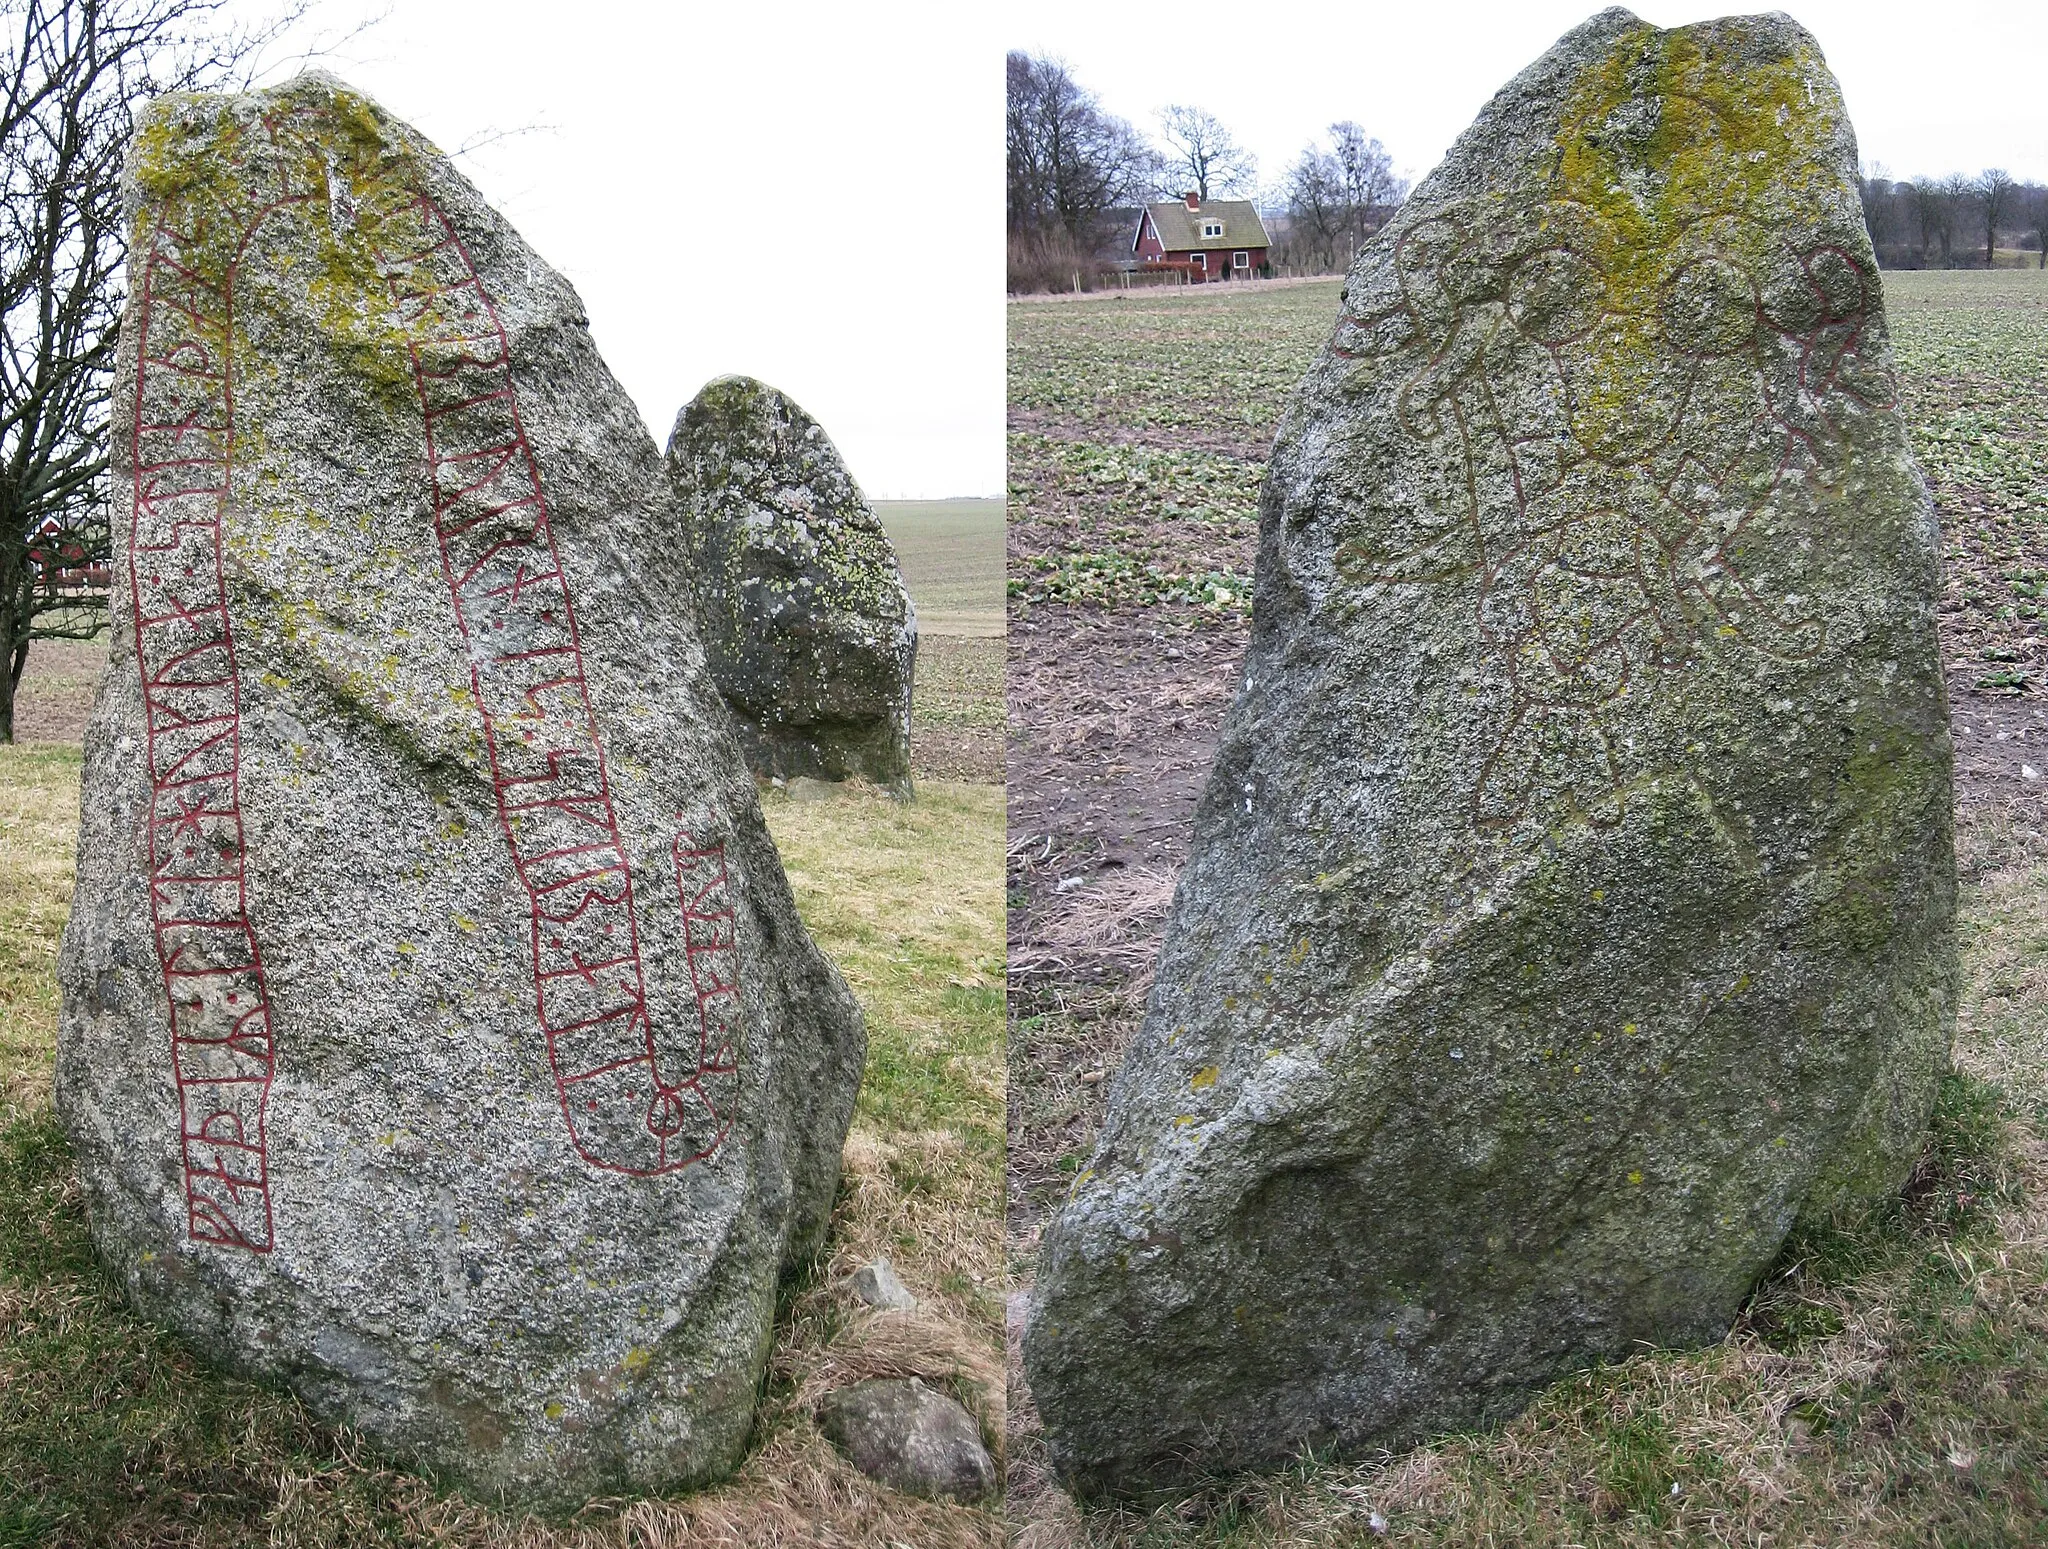 Photo showing: DR 335 - Västra Ströstenen 2. The DR 335 runestone at the Västra Strö viking age monument. Photos and merge by the uploader 2009-03-14.